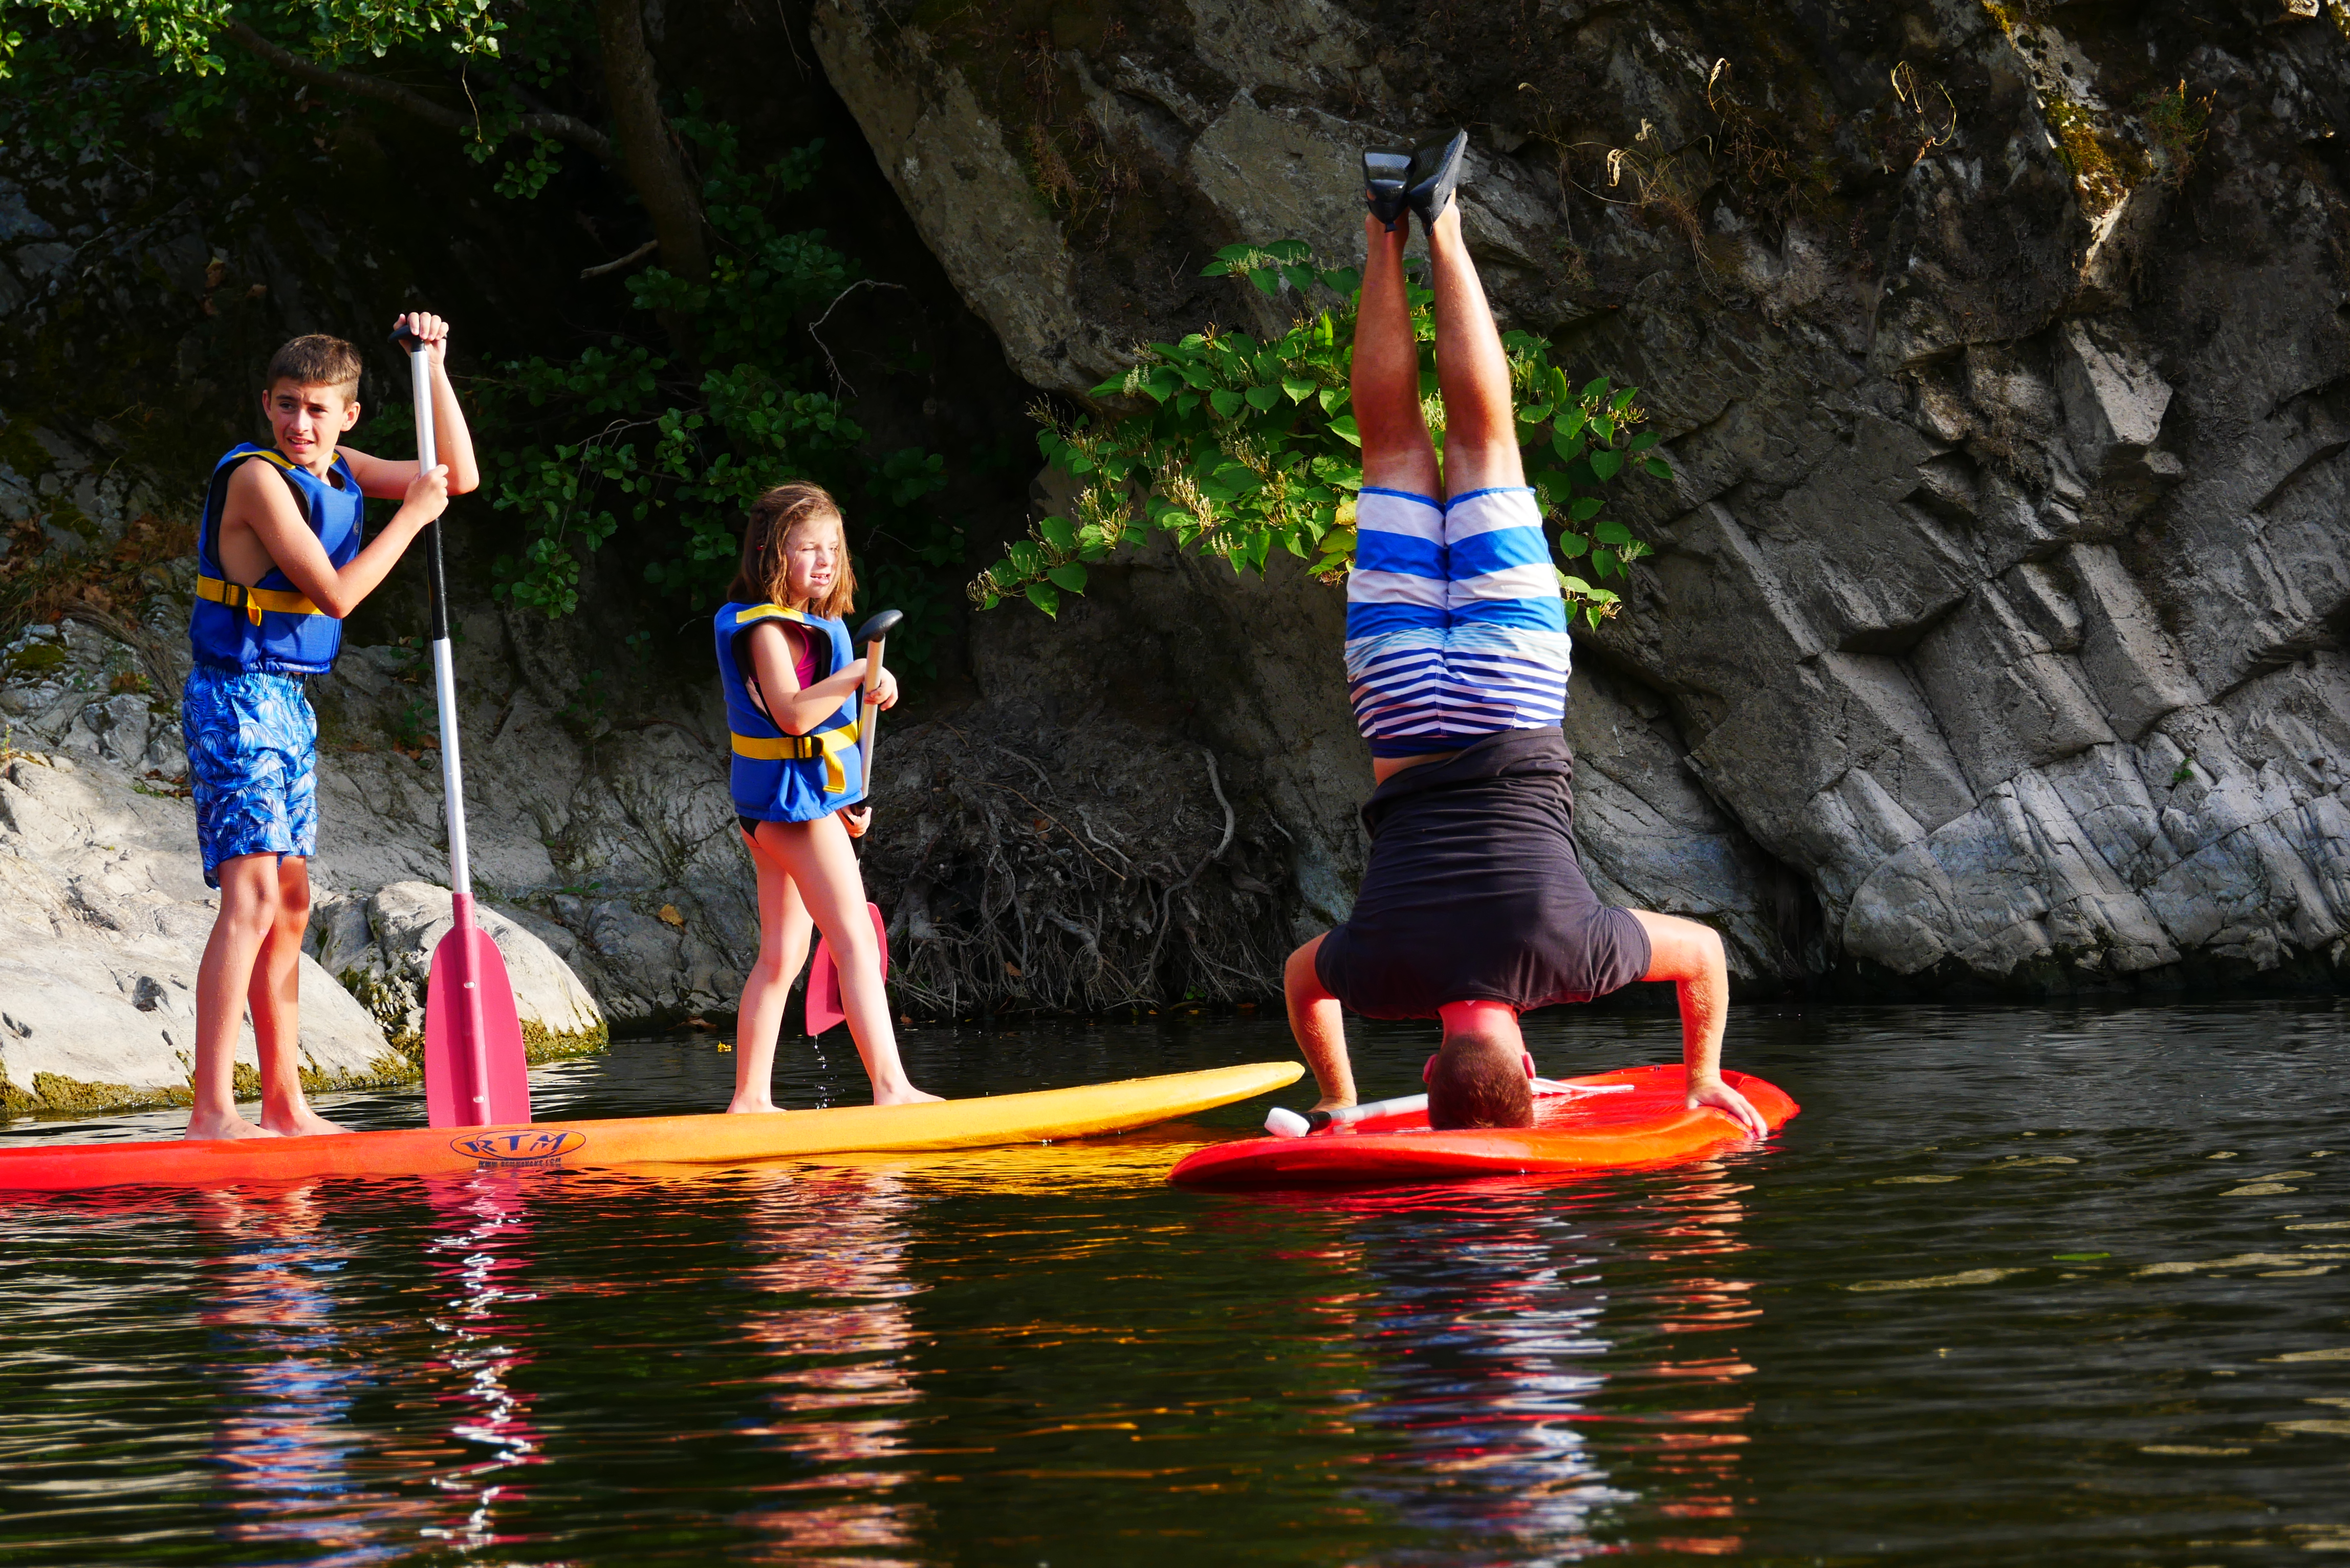 Sports : Stand-up paddle